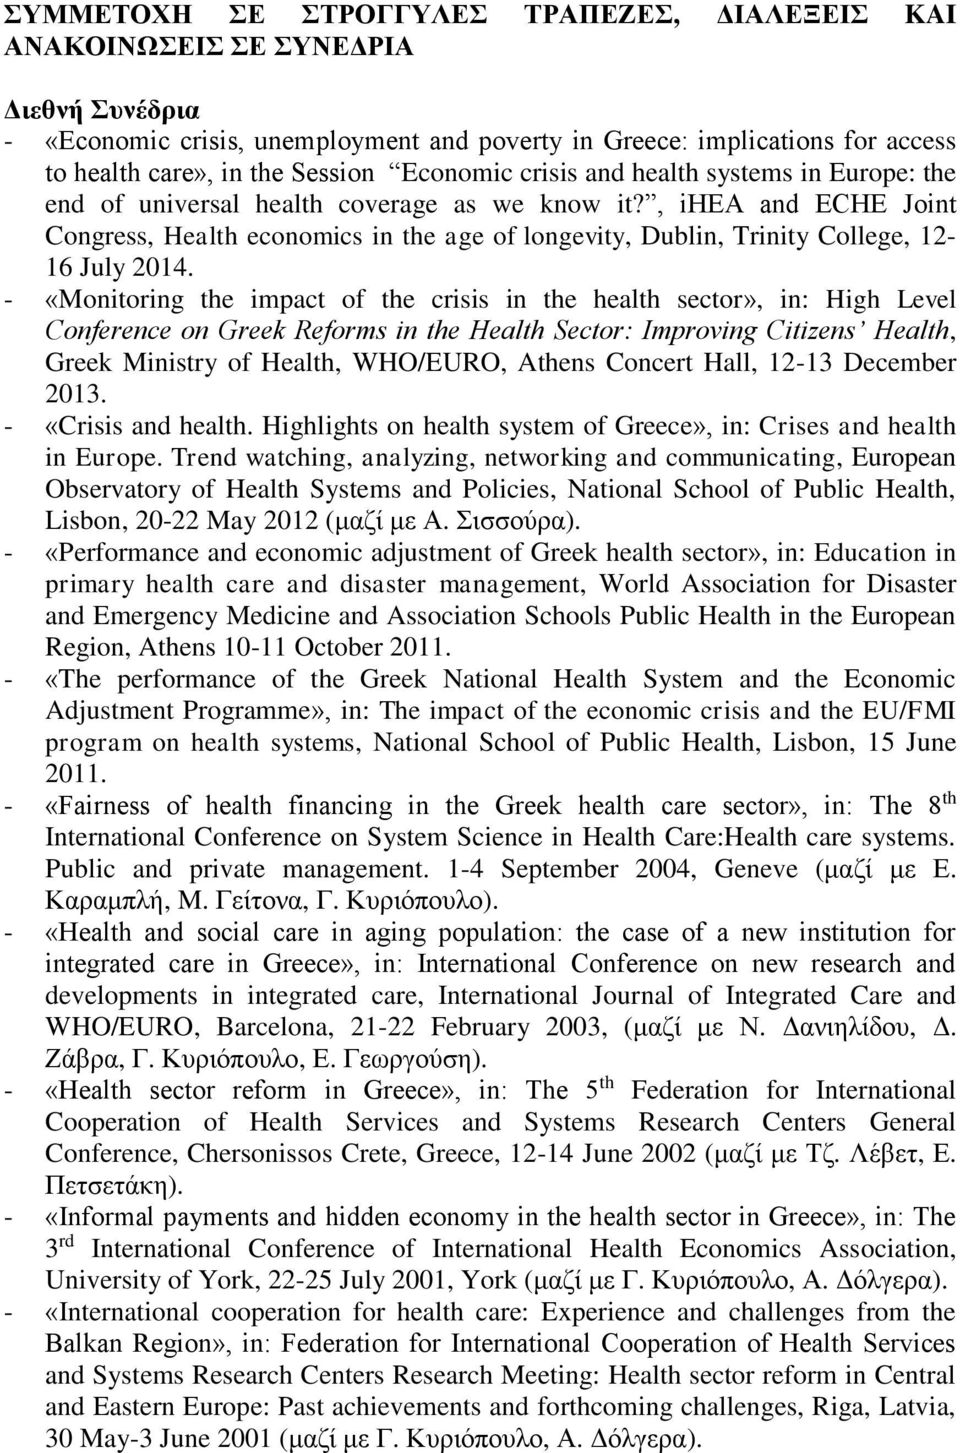 , ihea and ECHE Joint Congress, Health economics in the age of longevity, Dublin, Trinity College, 12-16 July 2014.